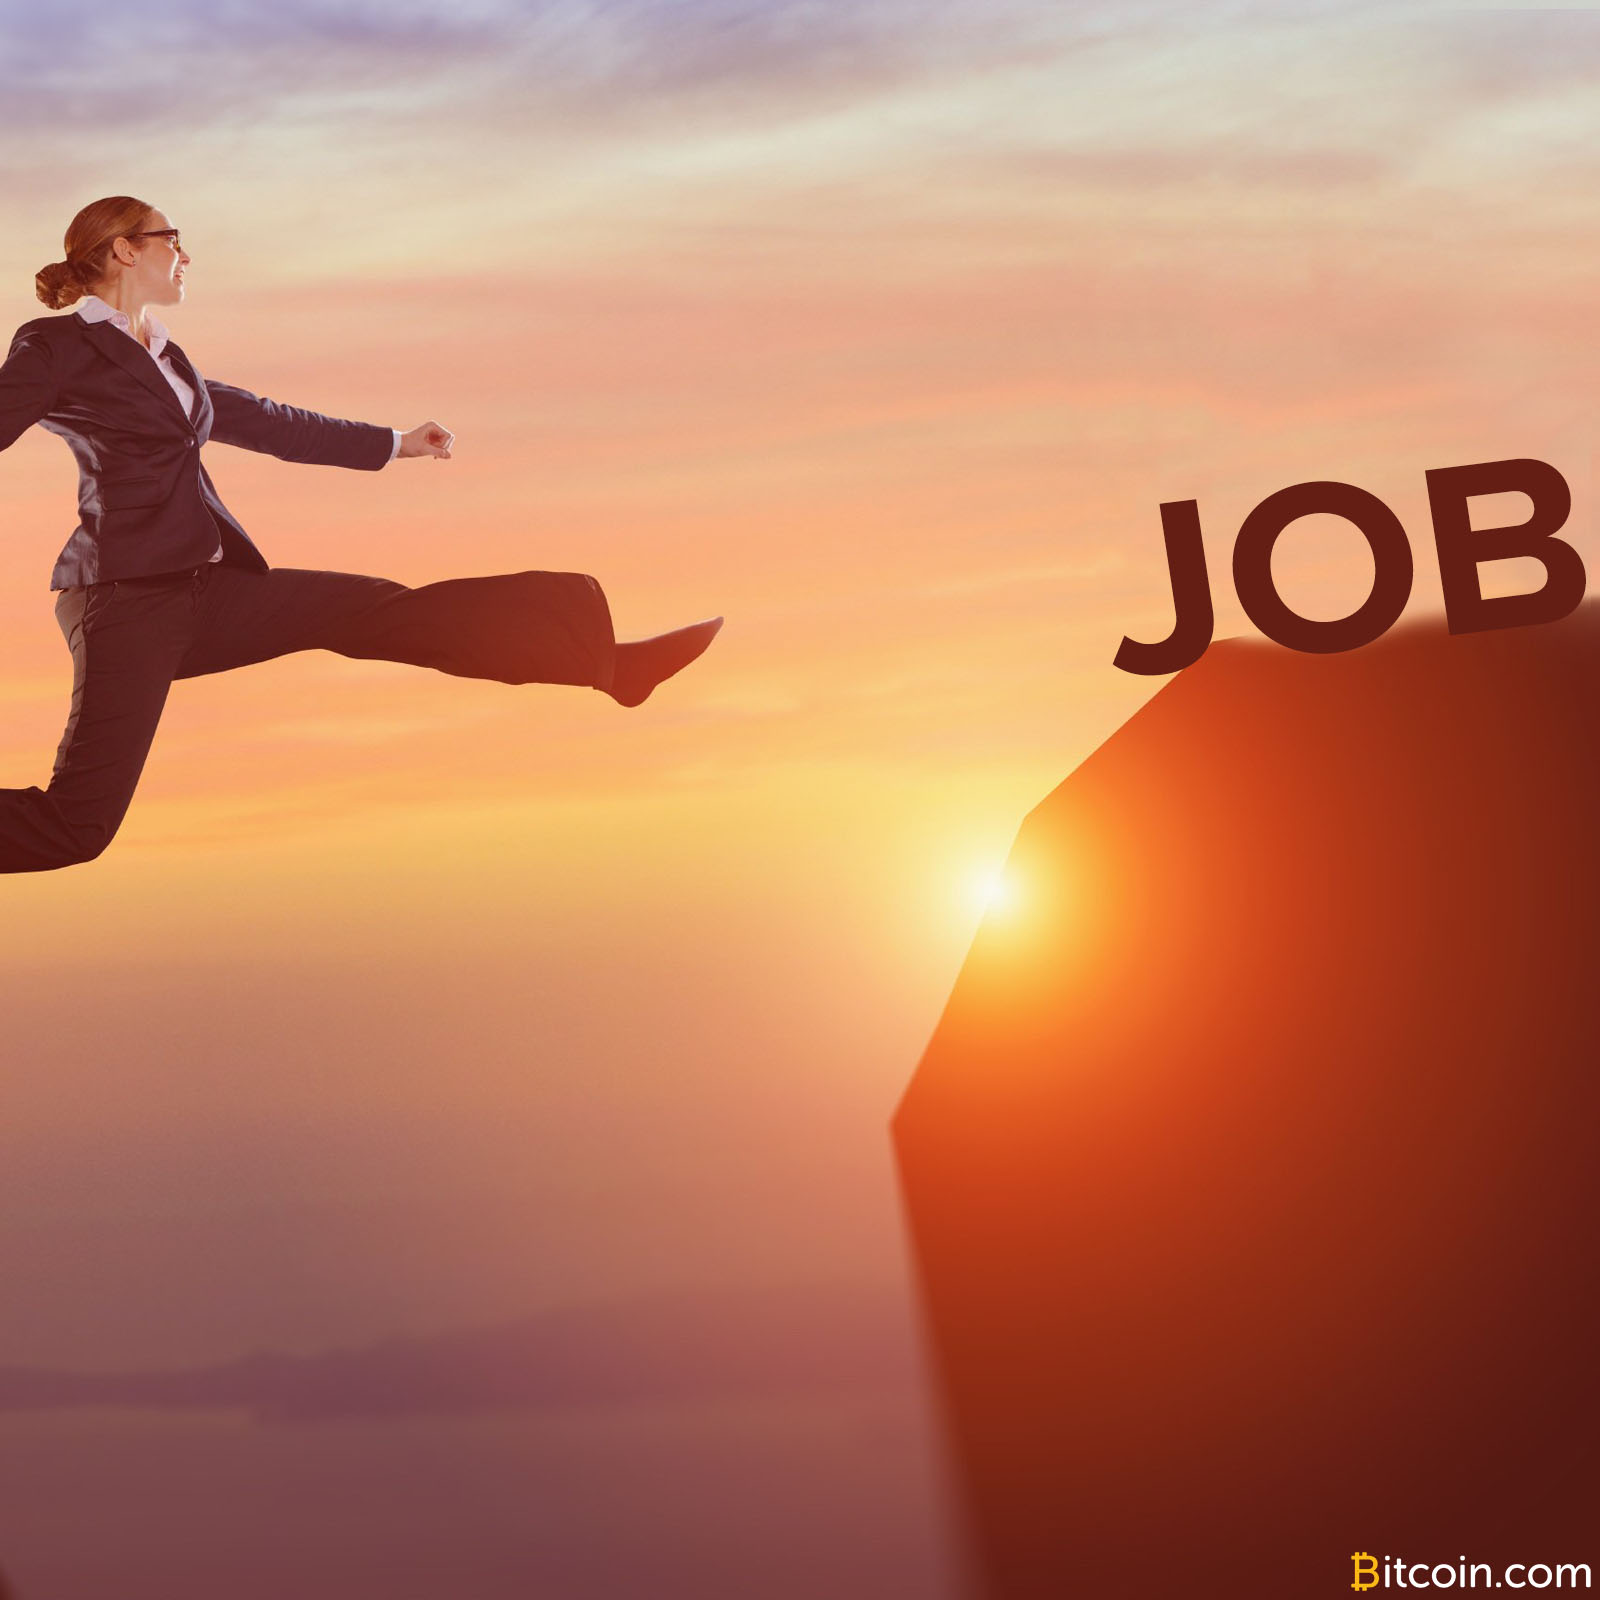 Bitcoin-Related Jobs Fastest Growing Sector of International Employment